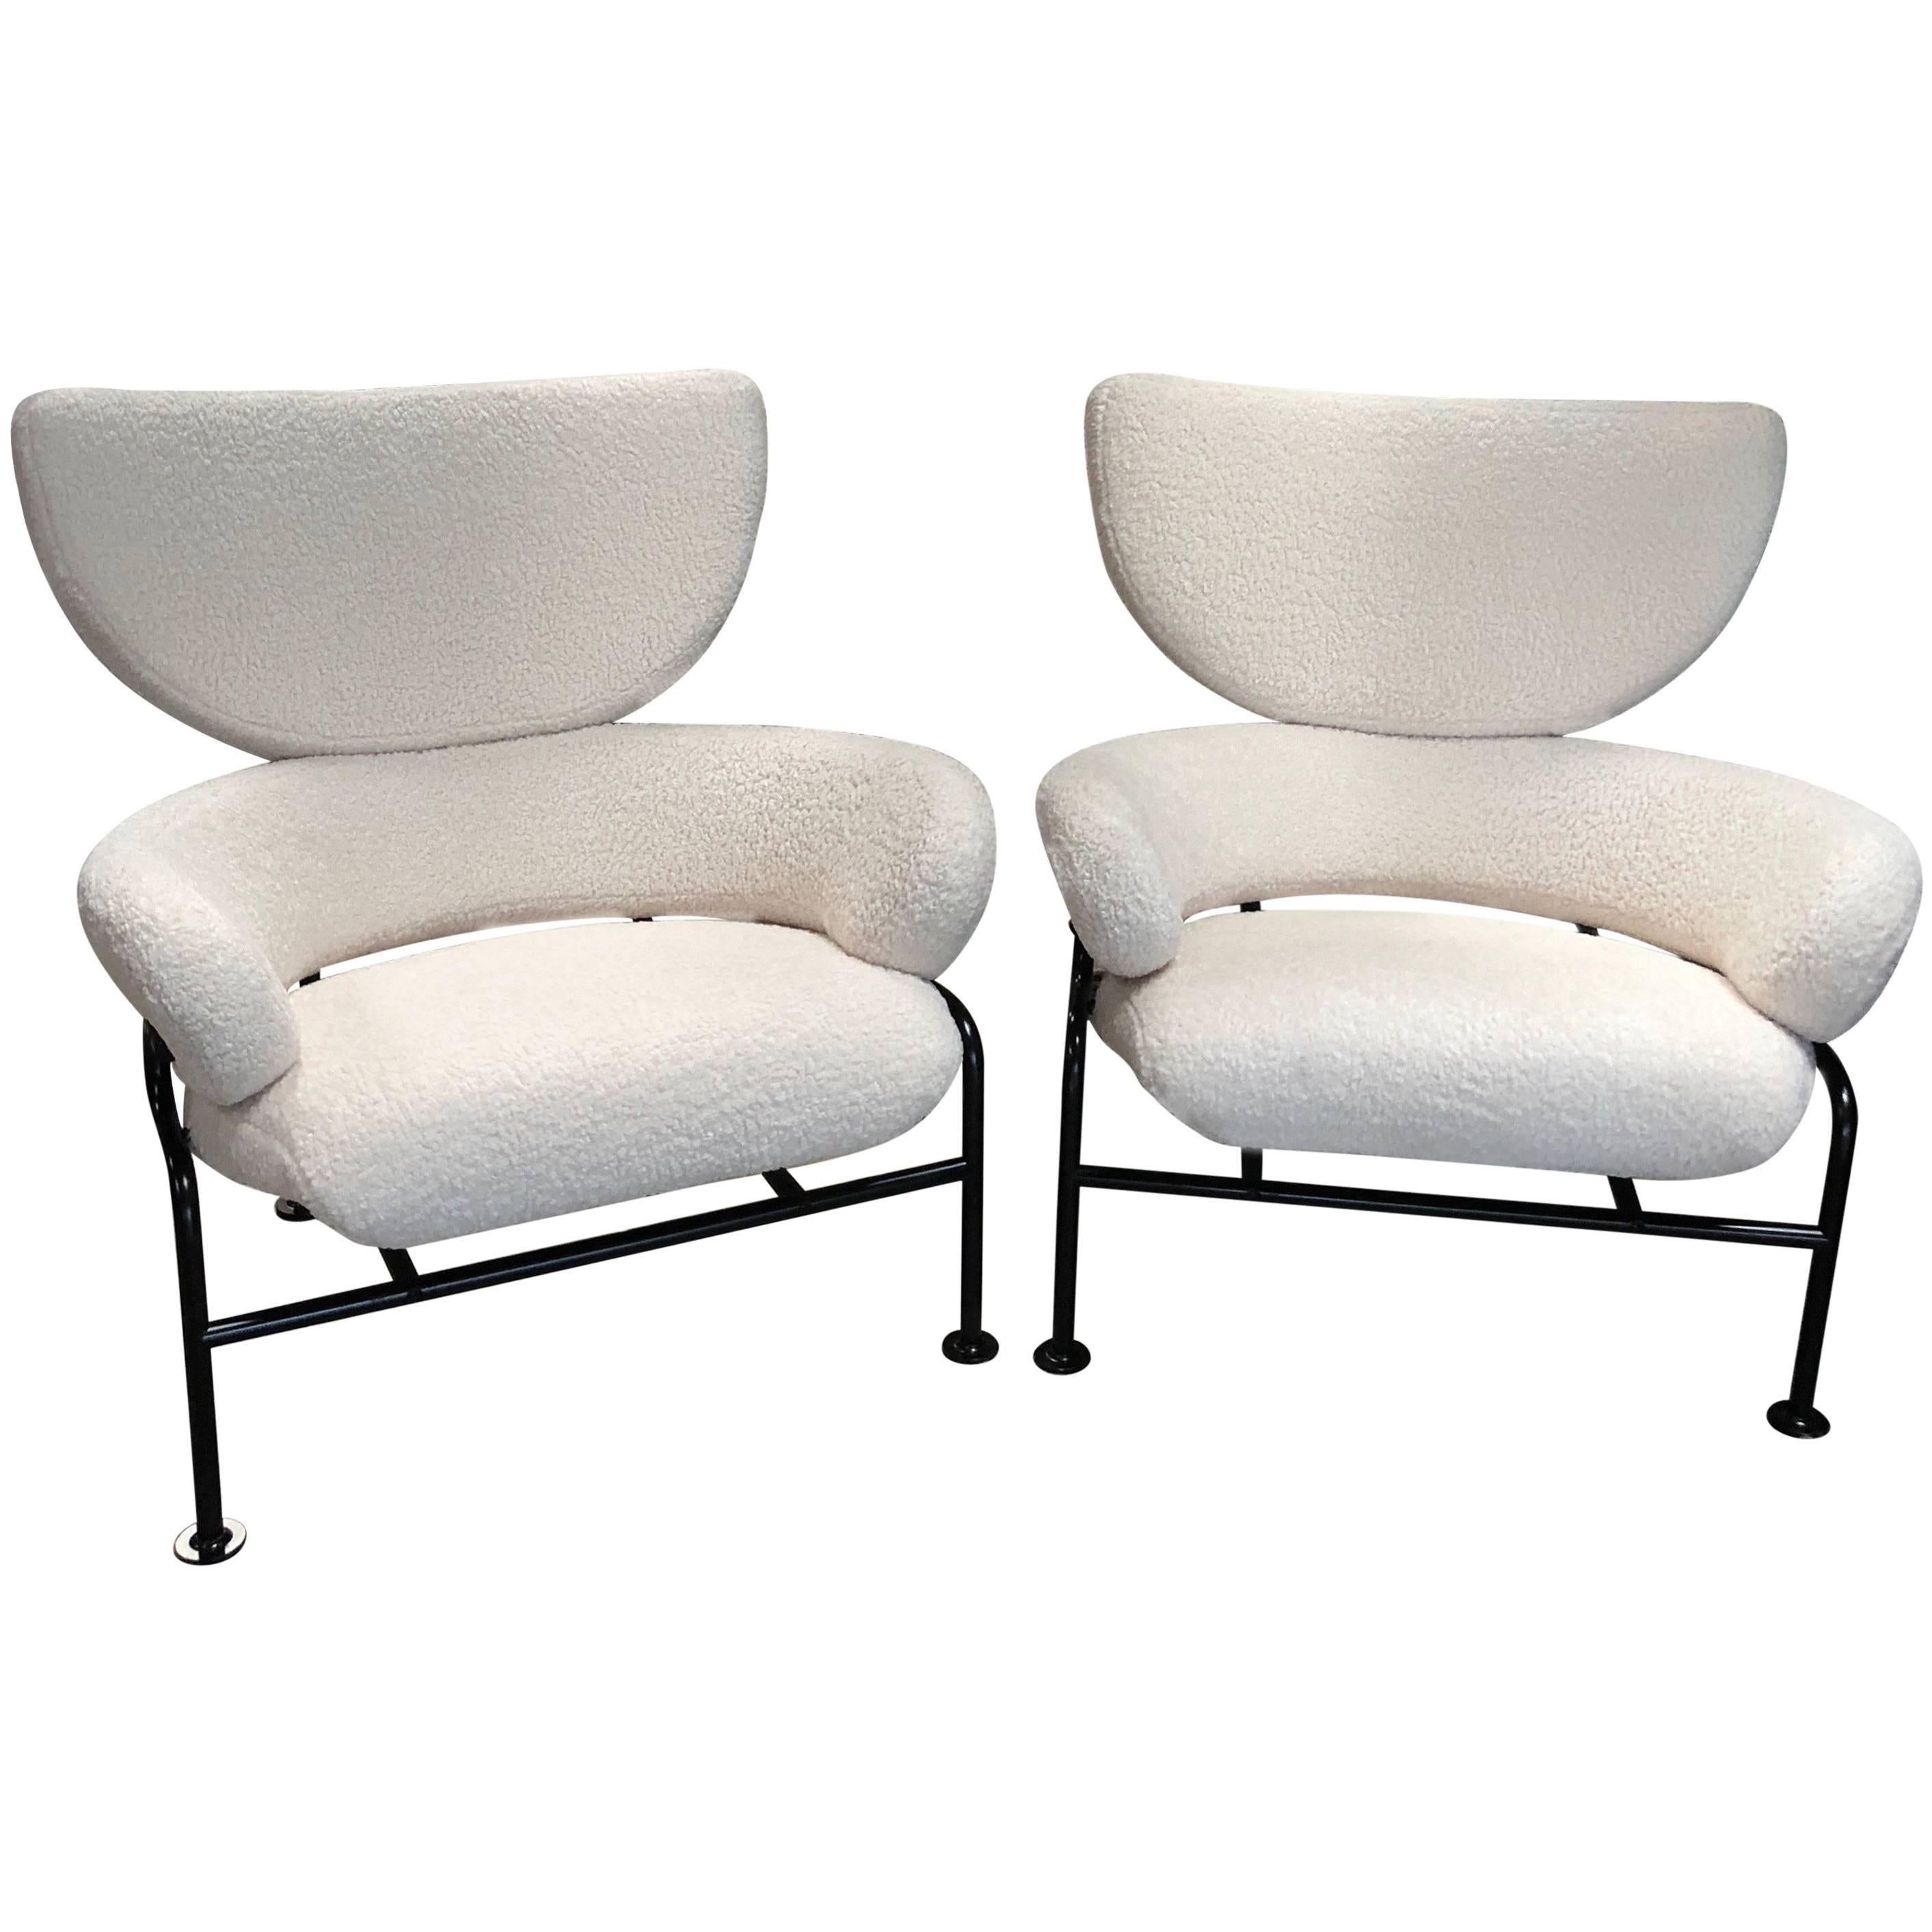 Armchairs “Tre Pezzi Pl19” by Franco Albini and Franca Helg